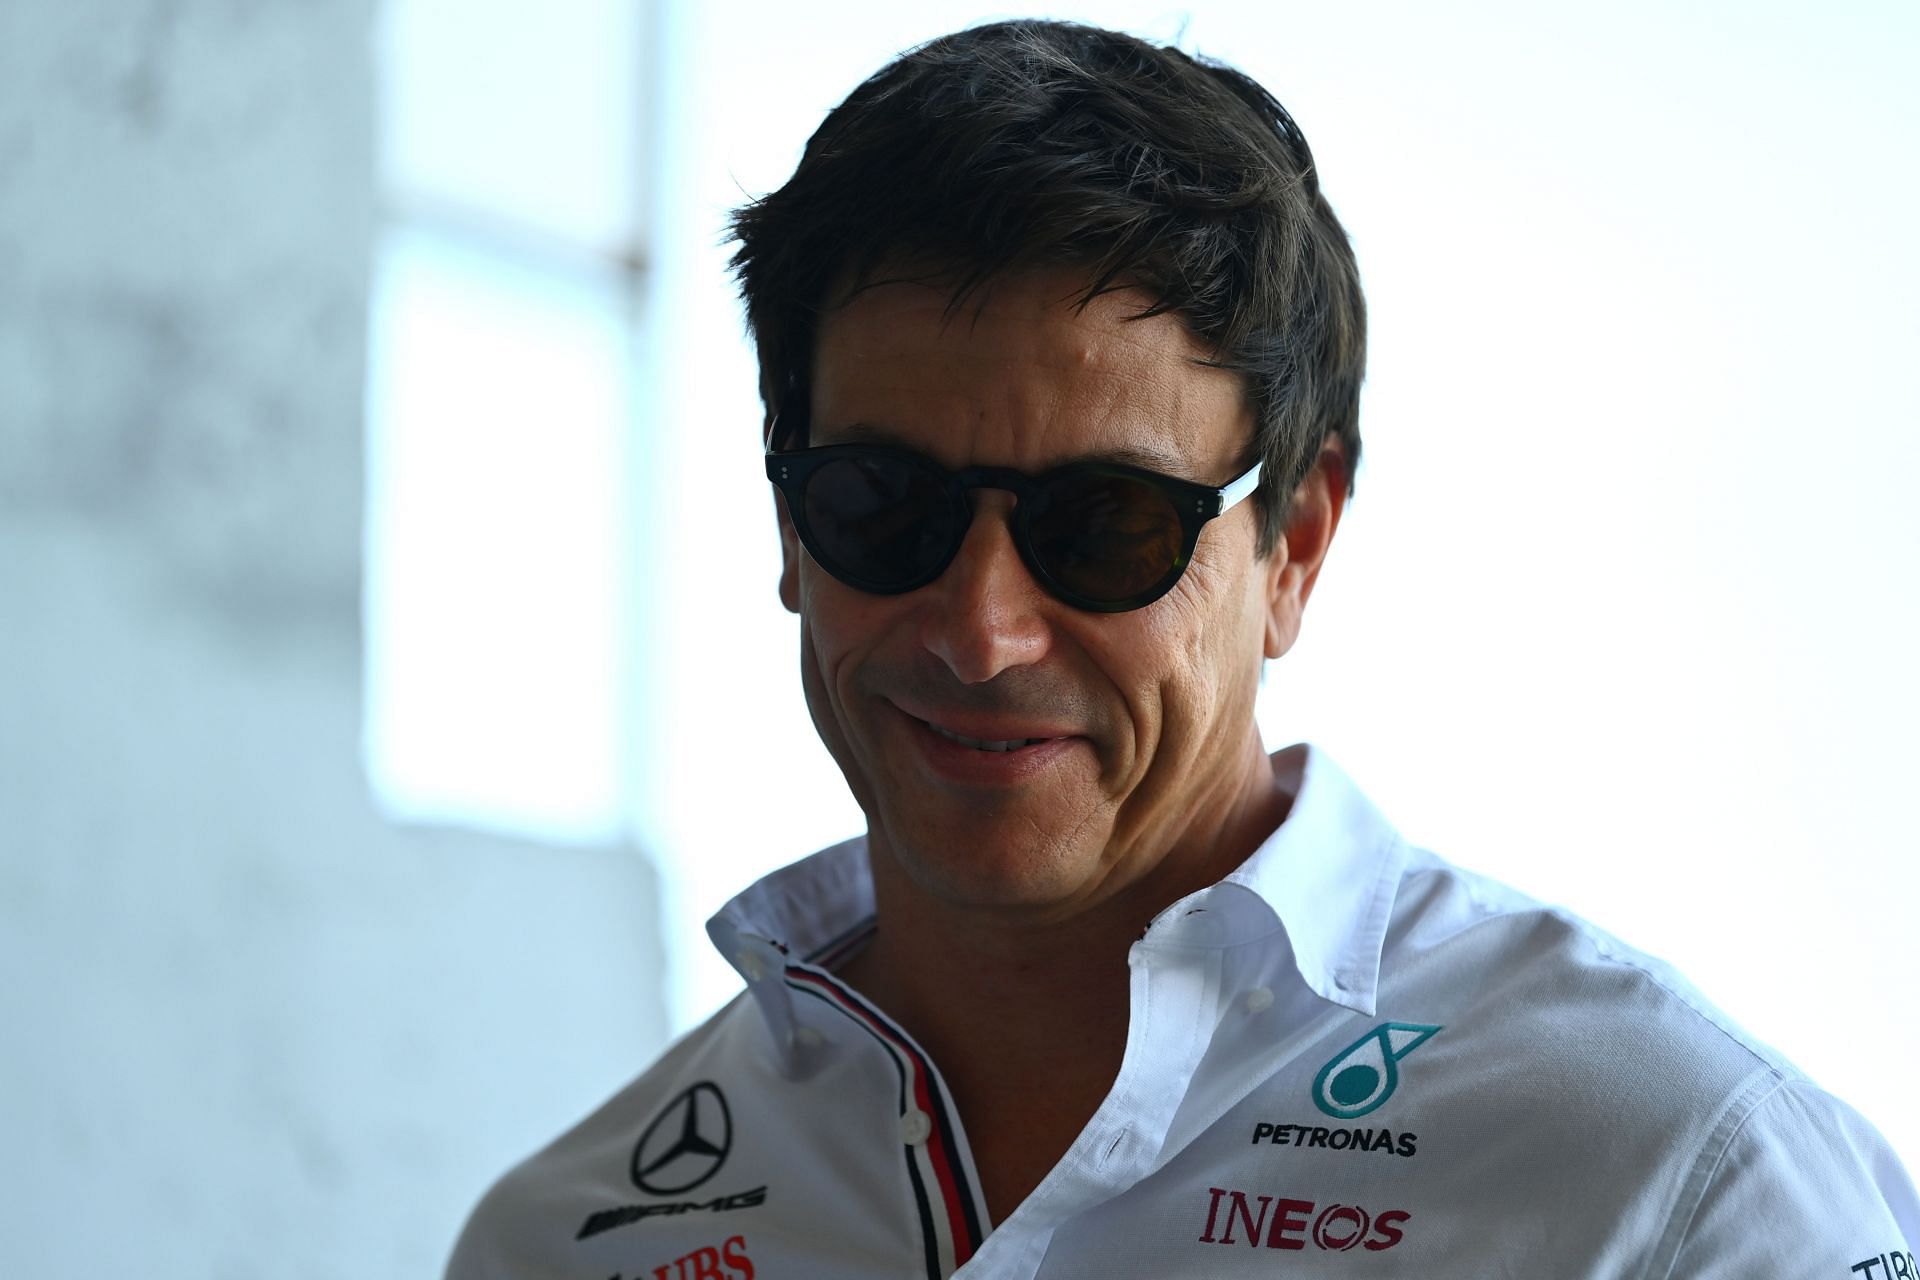 Flavio Briatore&#039;s post featuring Toto Wolff has not gone down well with the fans